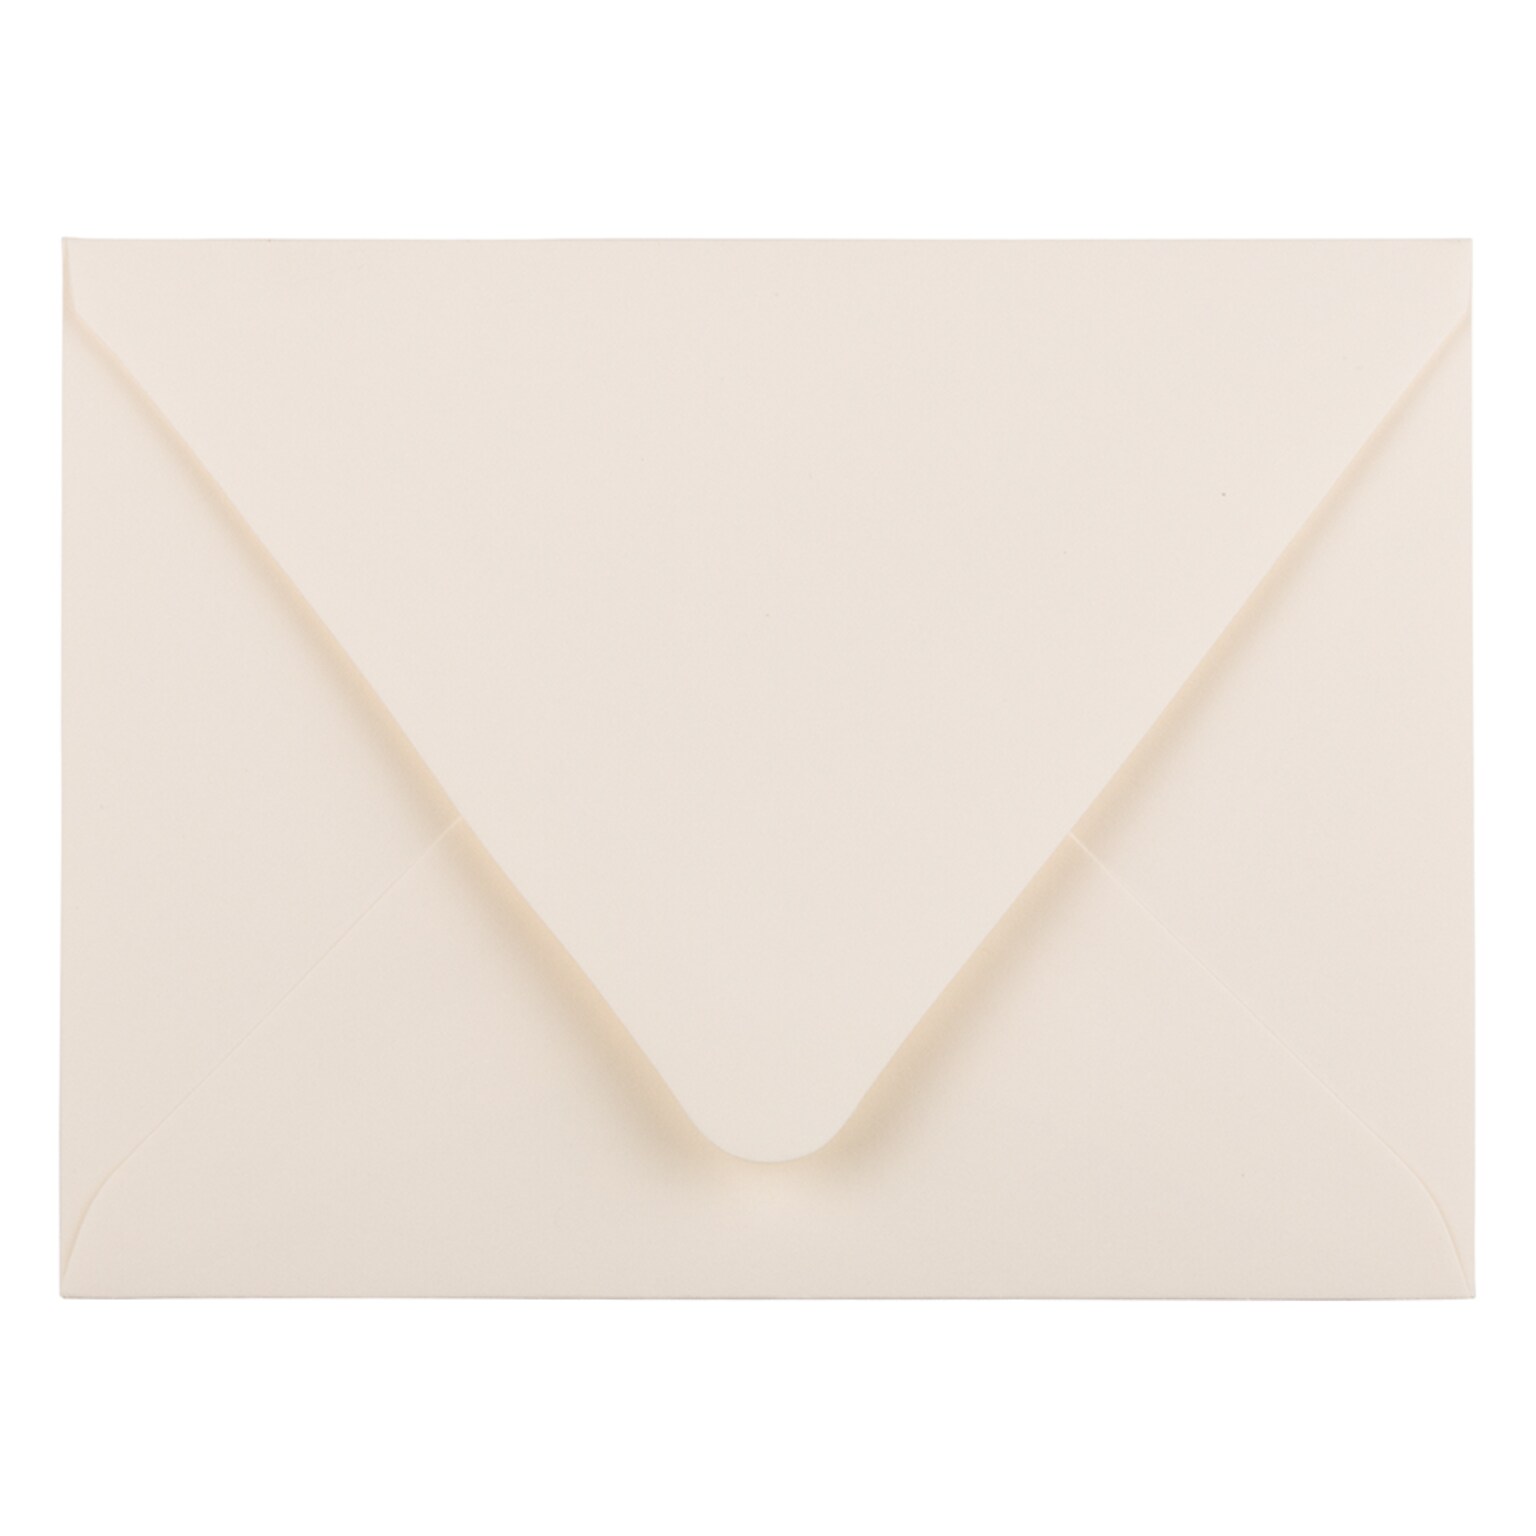 JAM Paper A2 Invitation Envelopes with Euro Flap, 4 3/8 x 5 3/4, Ivory, 50/Pack (235034673I)